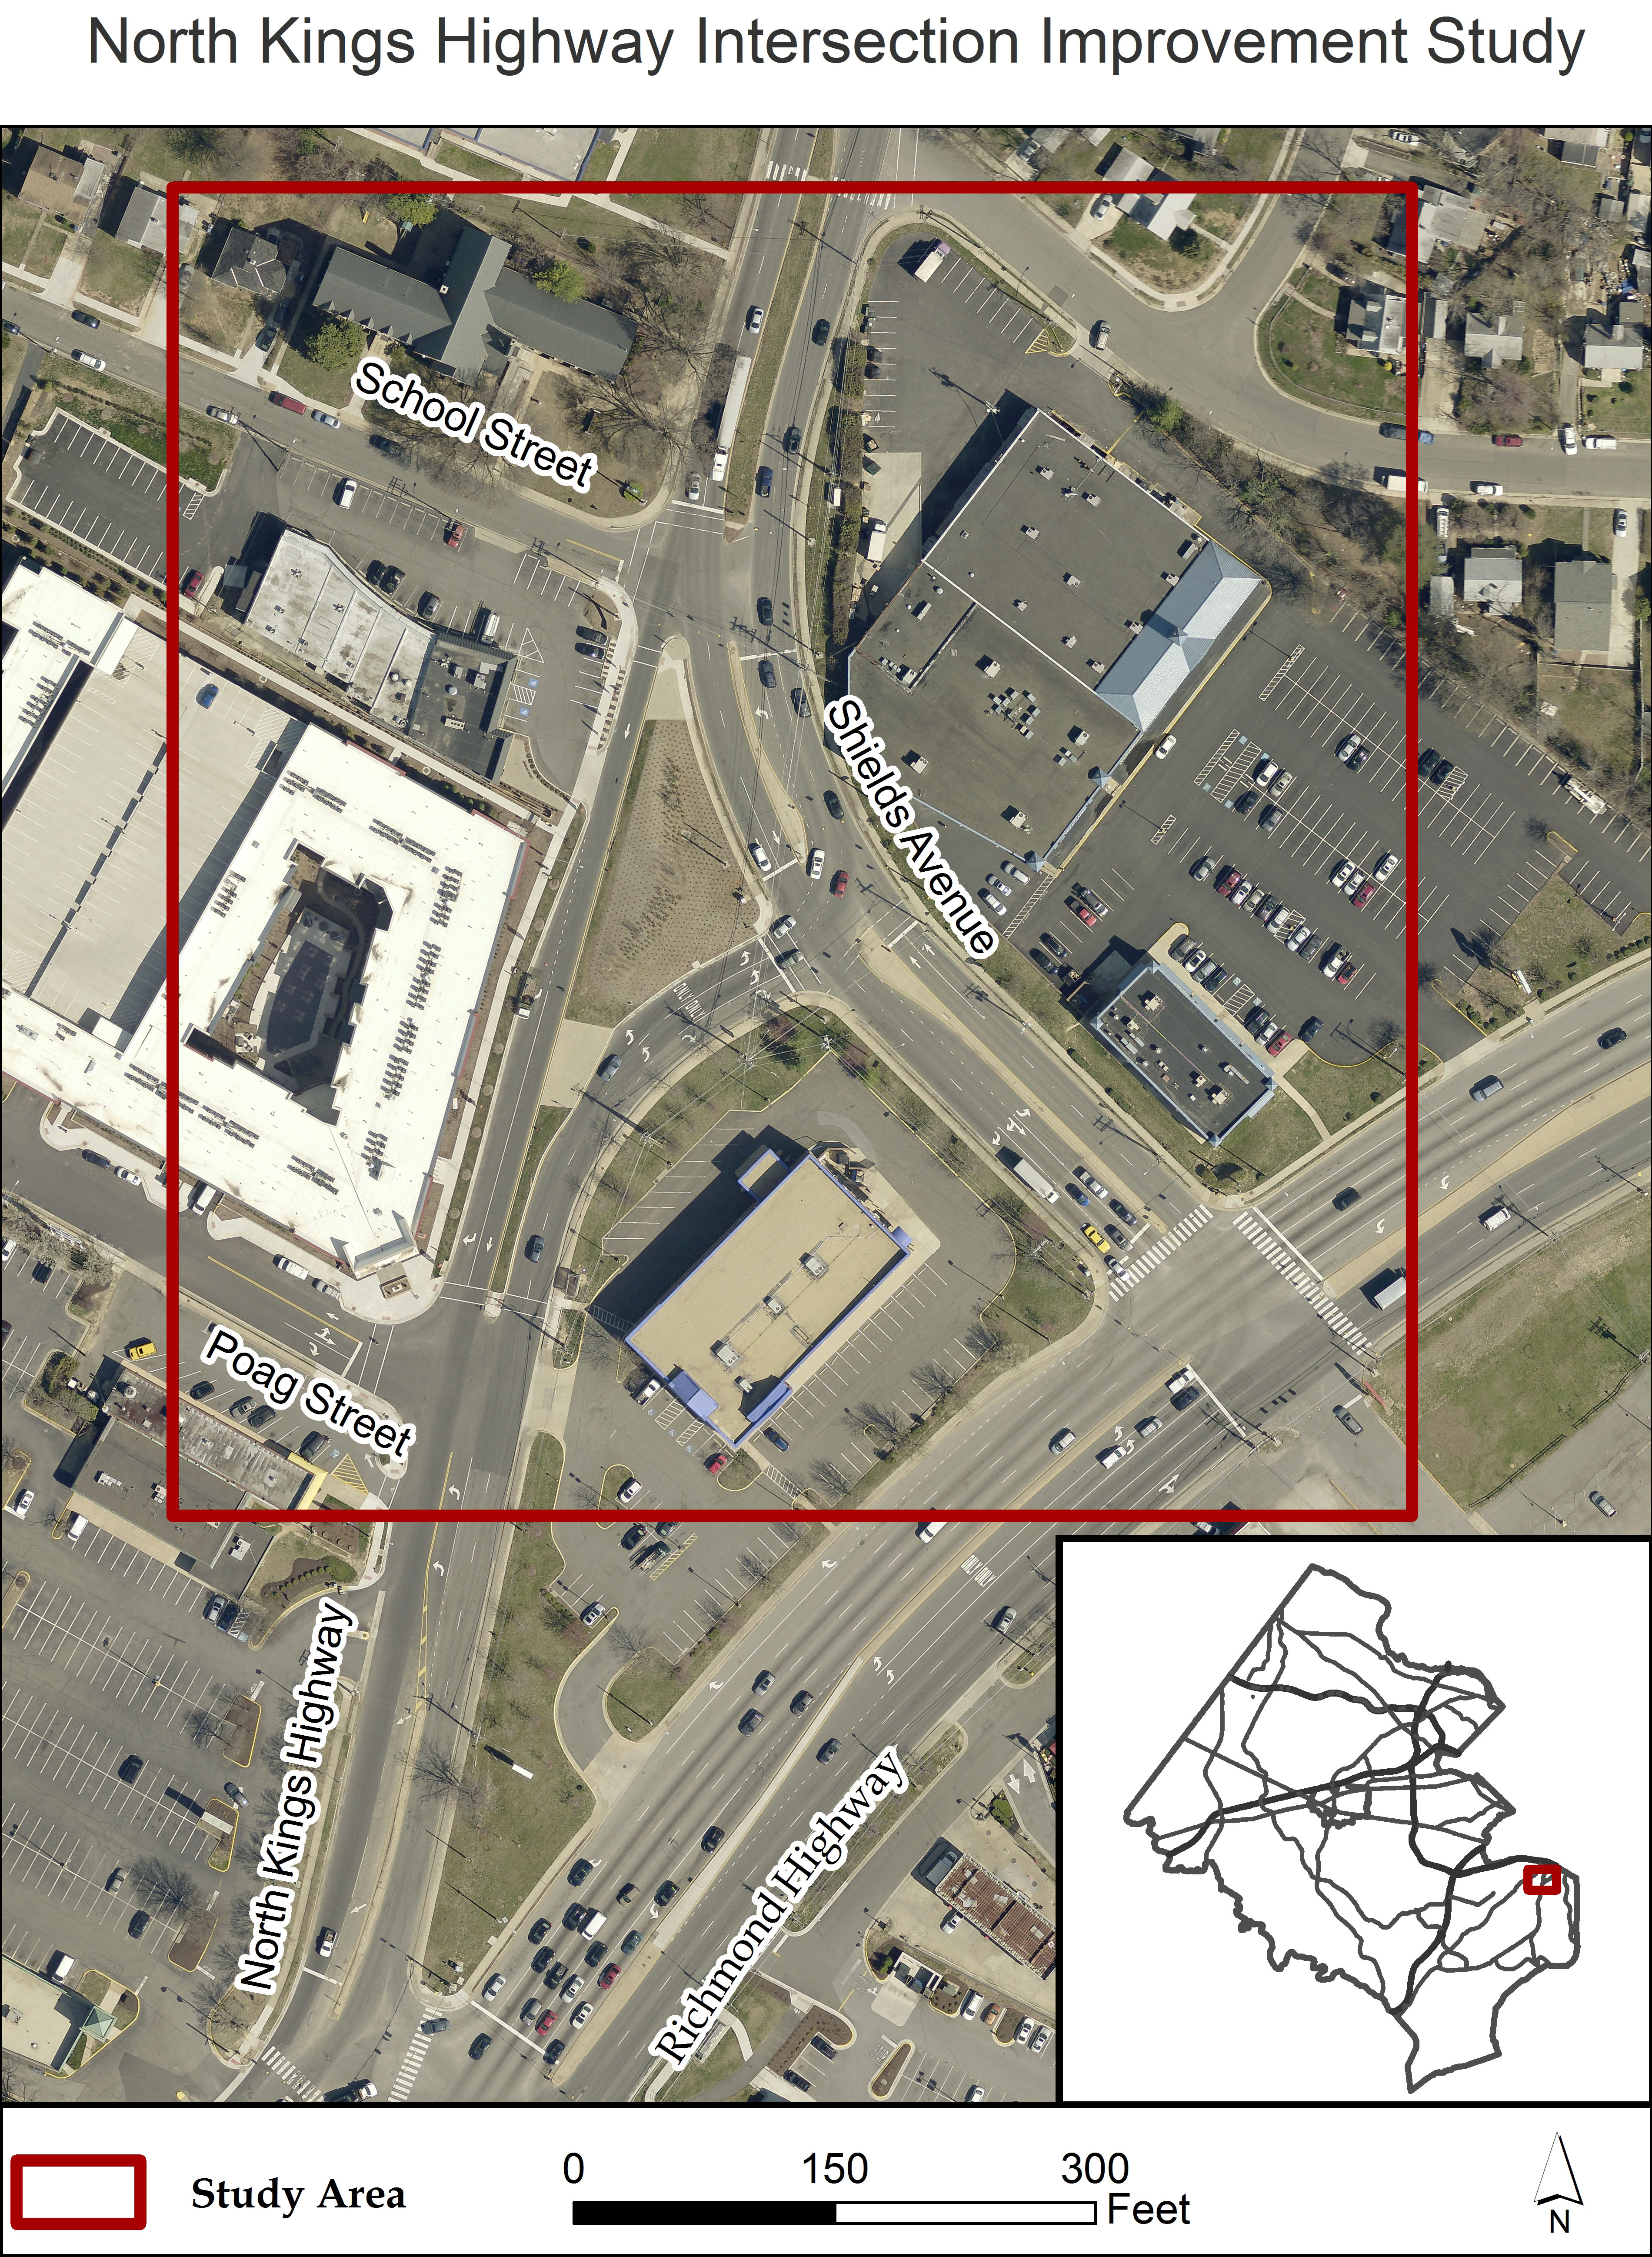 North Kings Highway Intersection Improvement Study